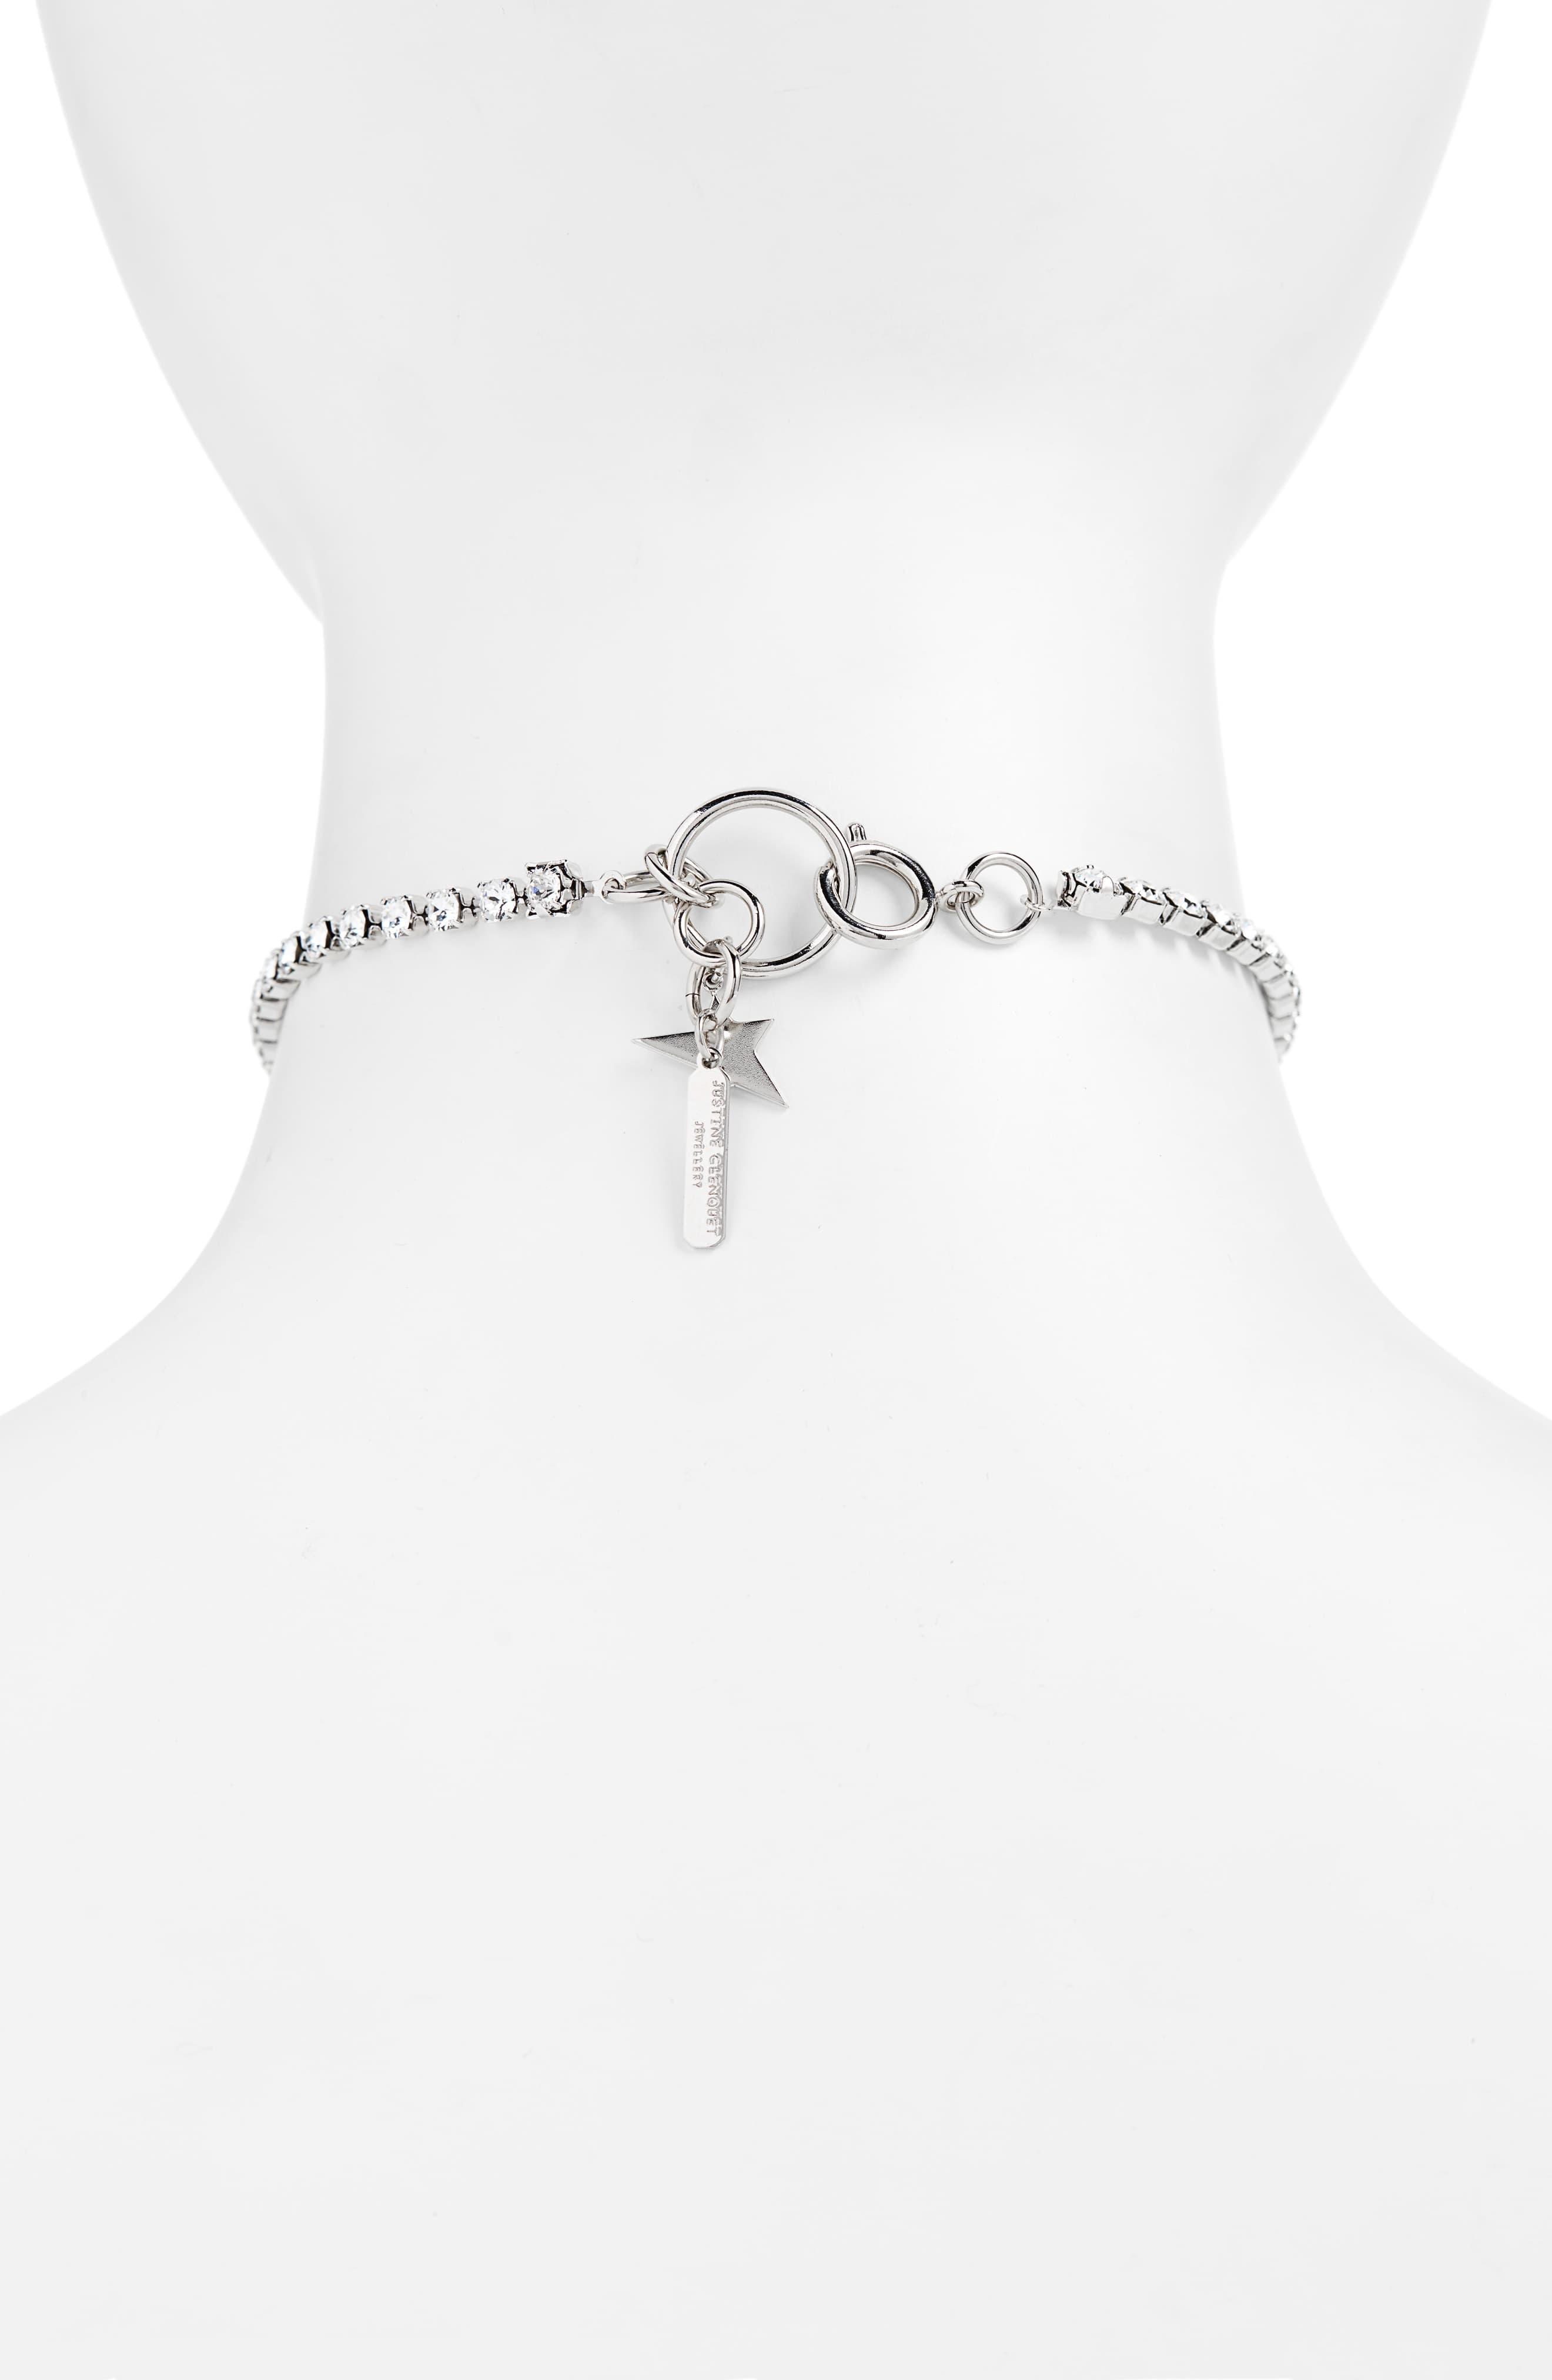 Justine Clenquet Cooper Crystal Choker in Silver (Metallic) - Lyst